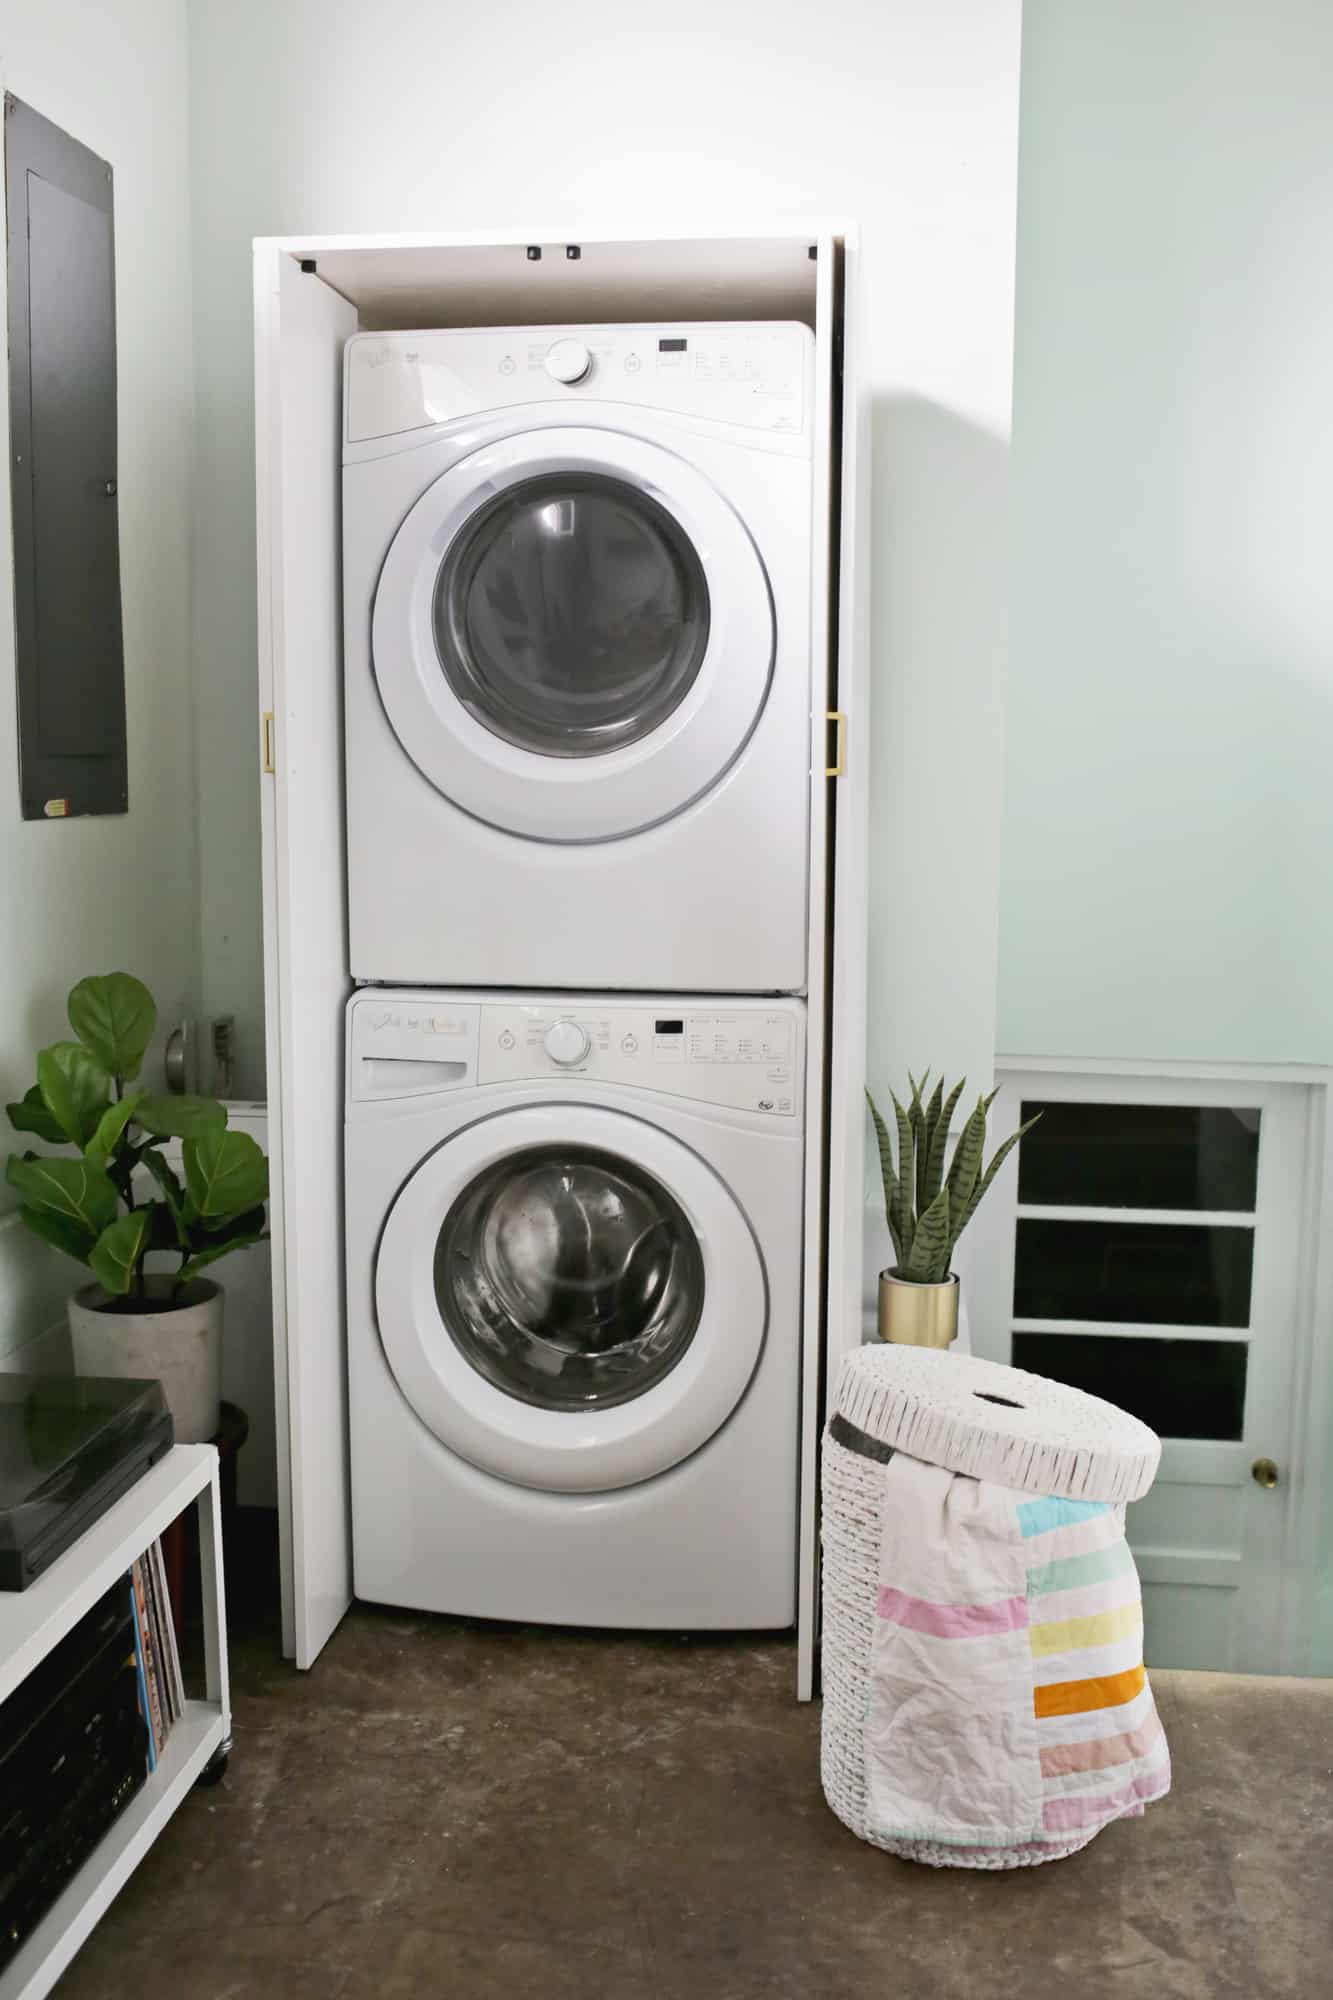 Washer And Dryer Cabinet A, How To Build Cabinets Hide Washer And Dryer